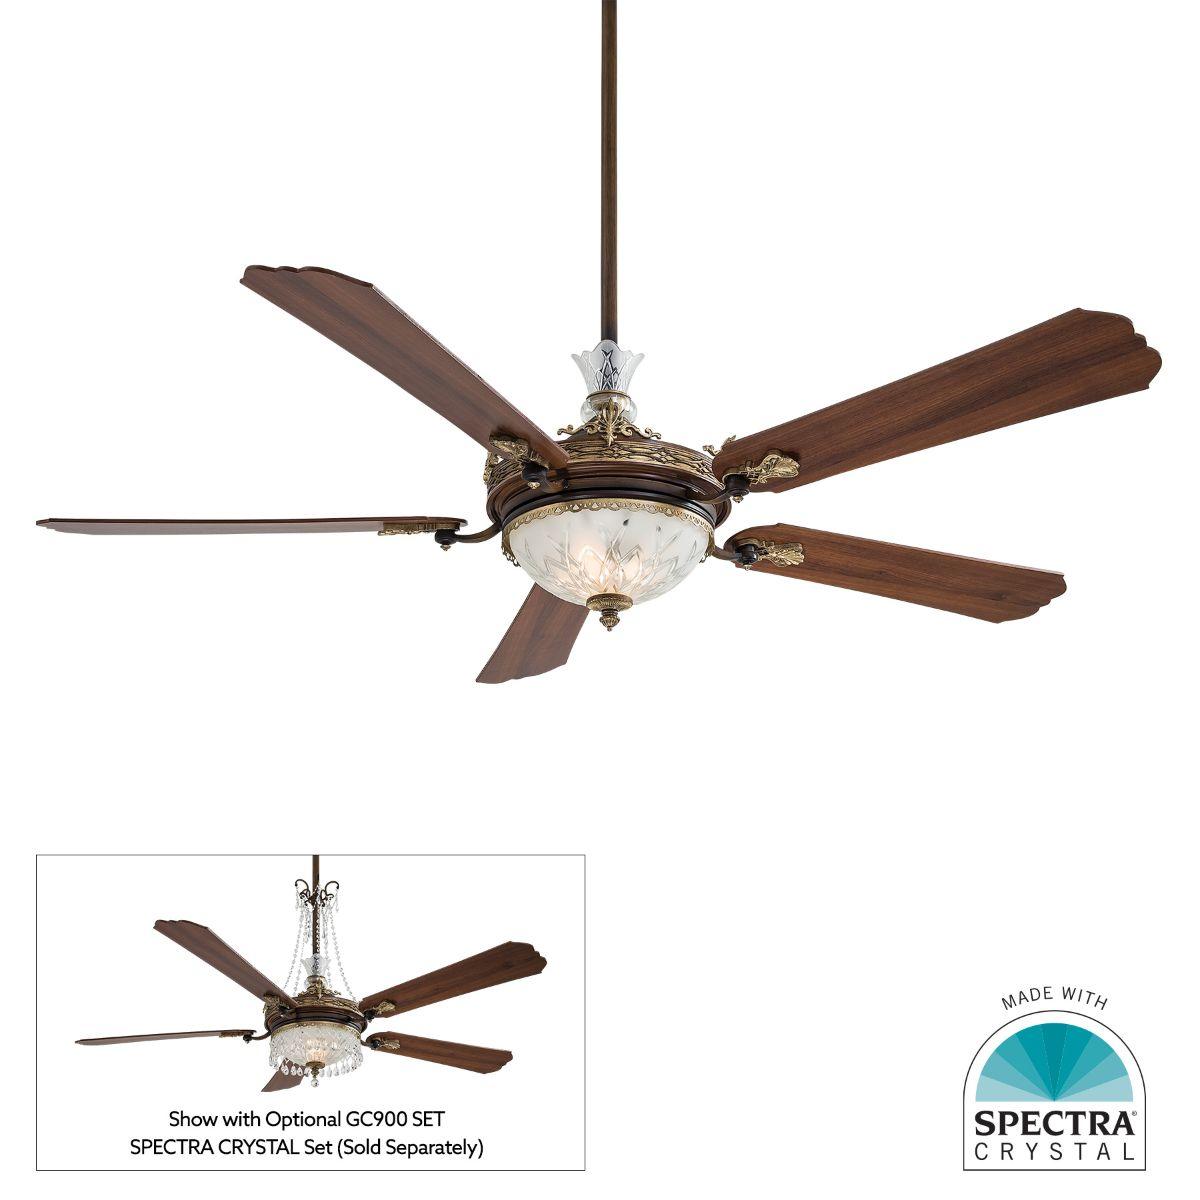 Cristafano 68 Inch Ceiling Fan With Light, Belcaro Walnut Finish, Wall Control Included